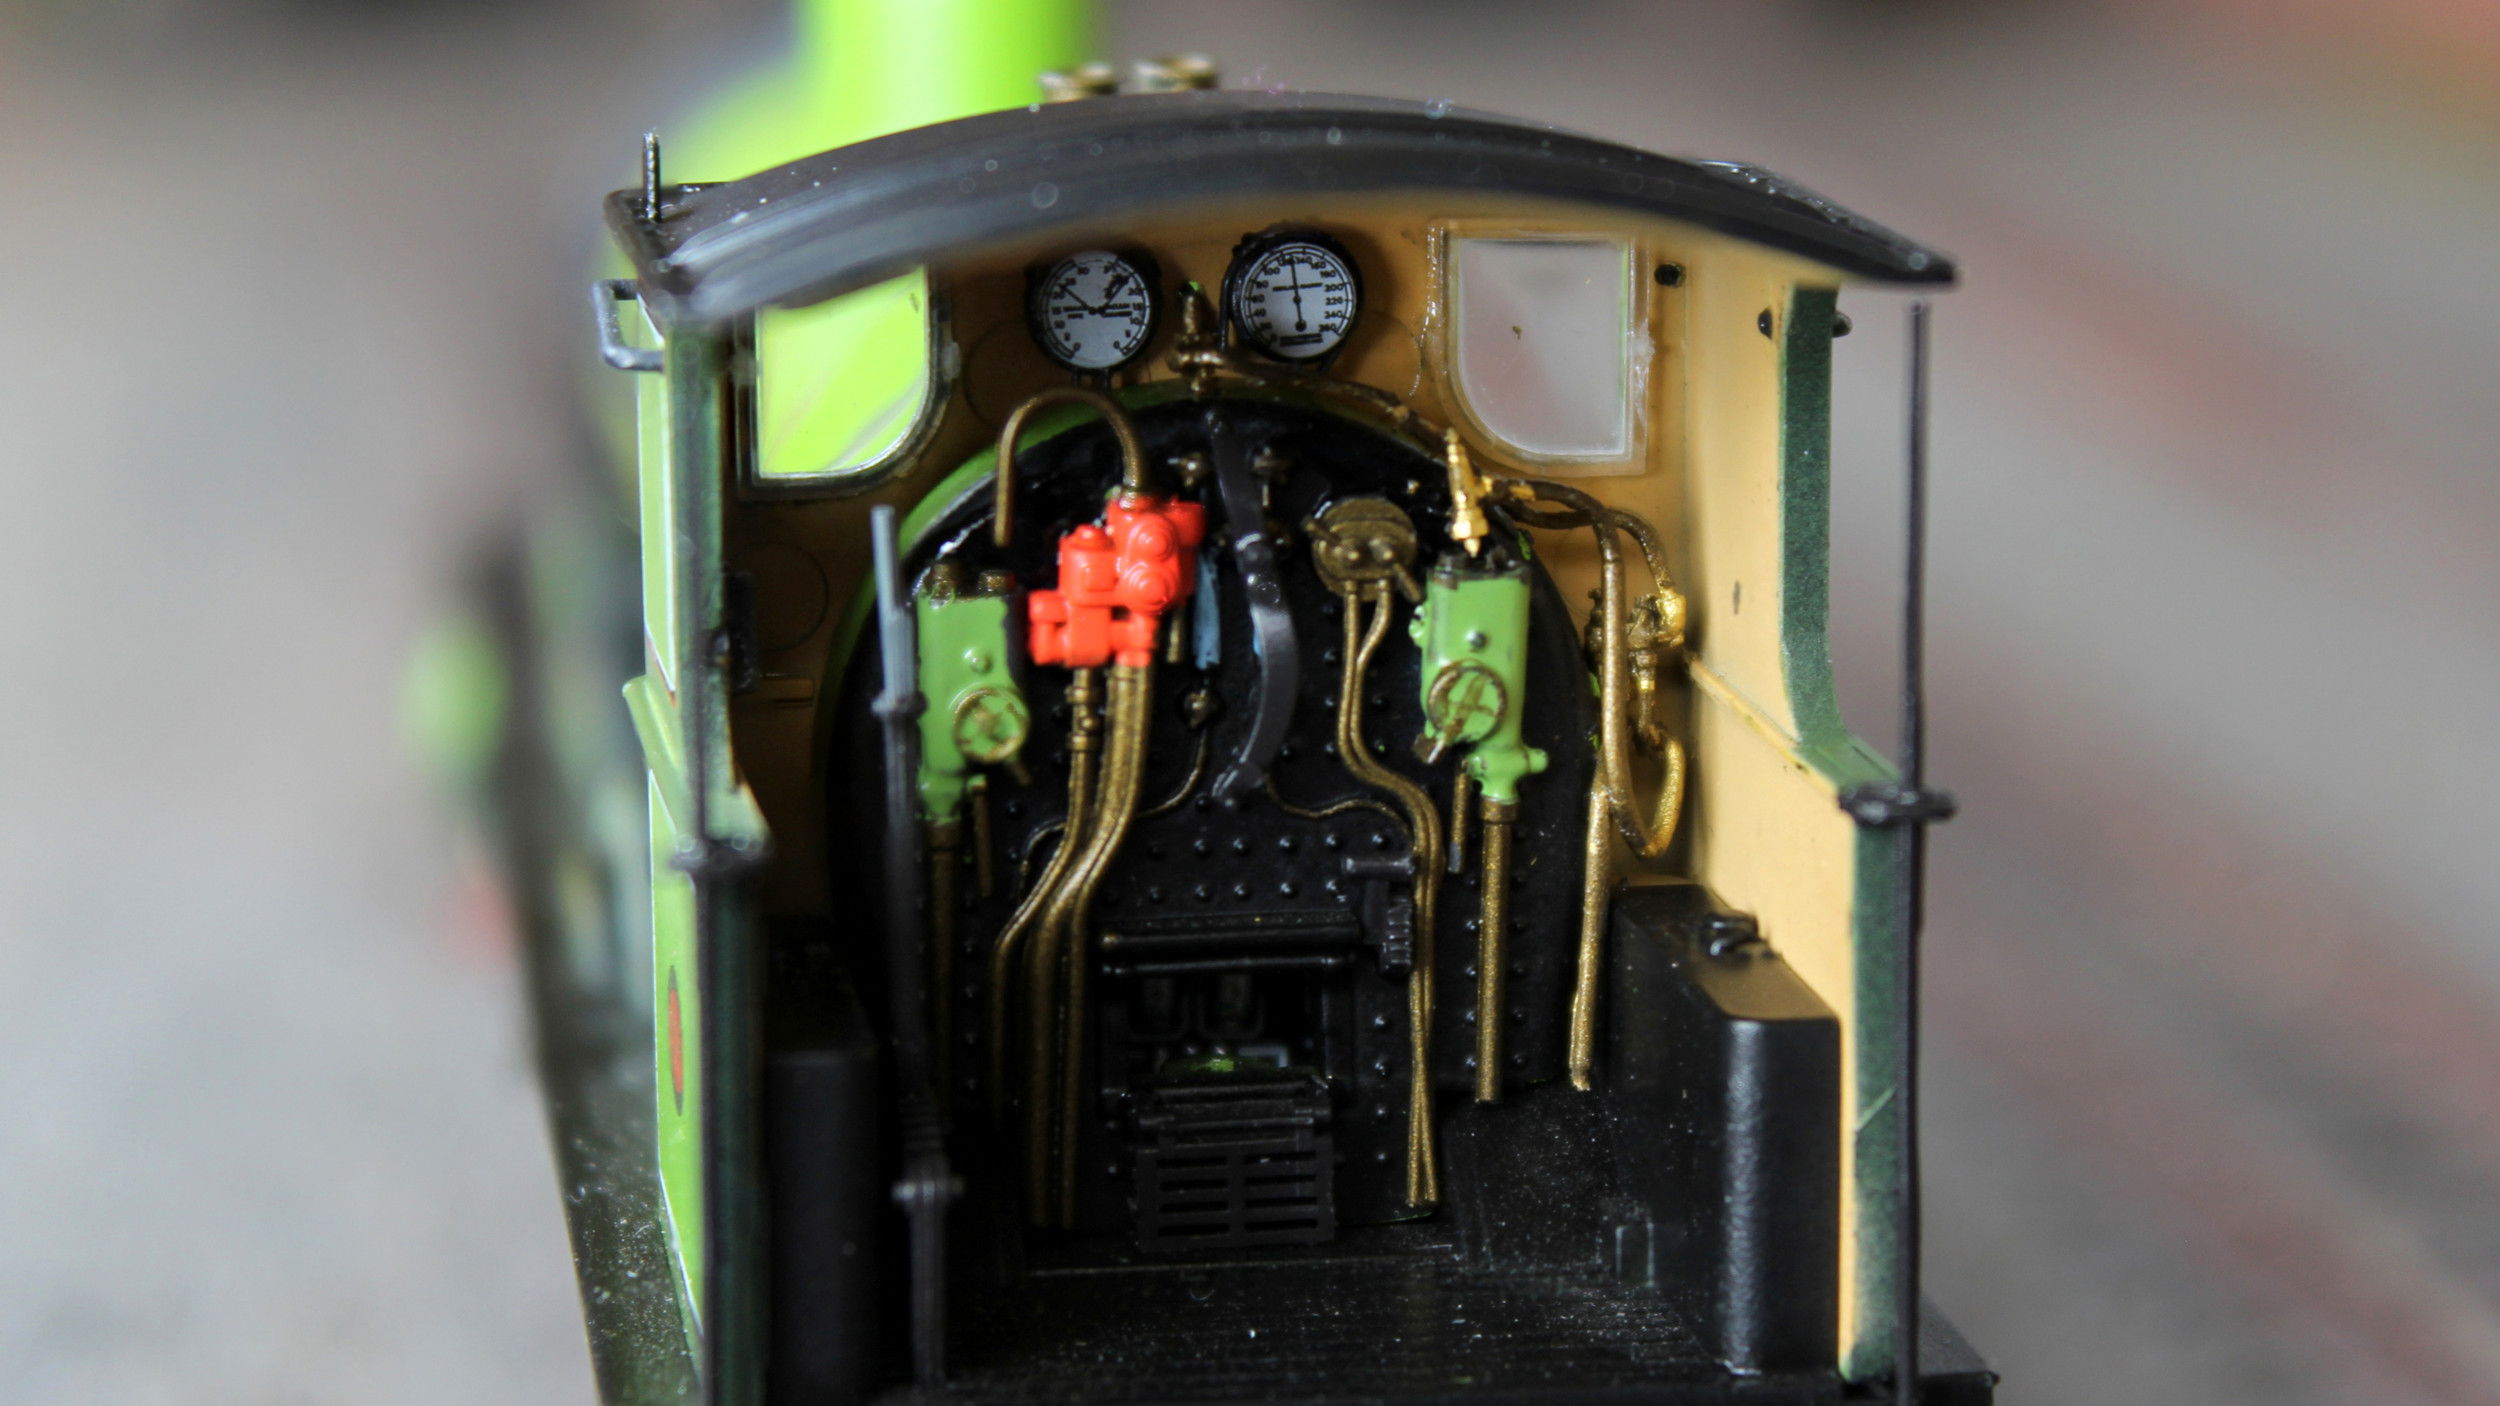 The Jones goods cab is no less detailed.